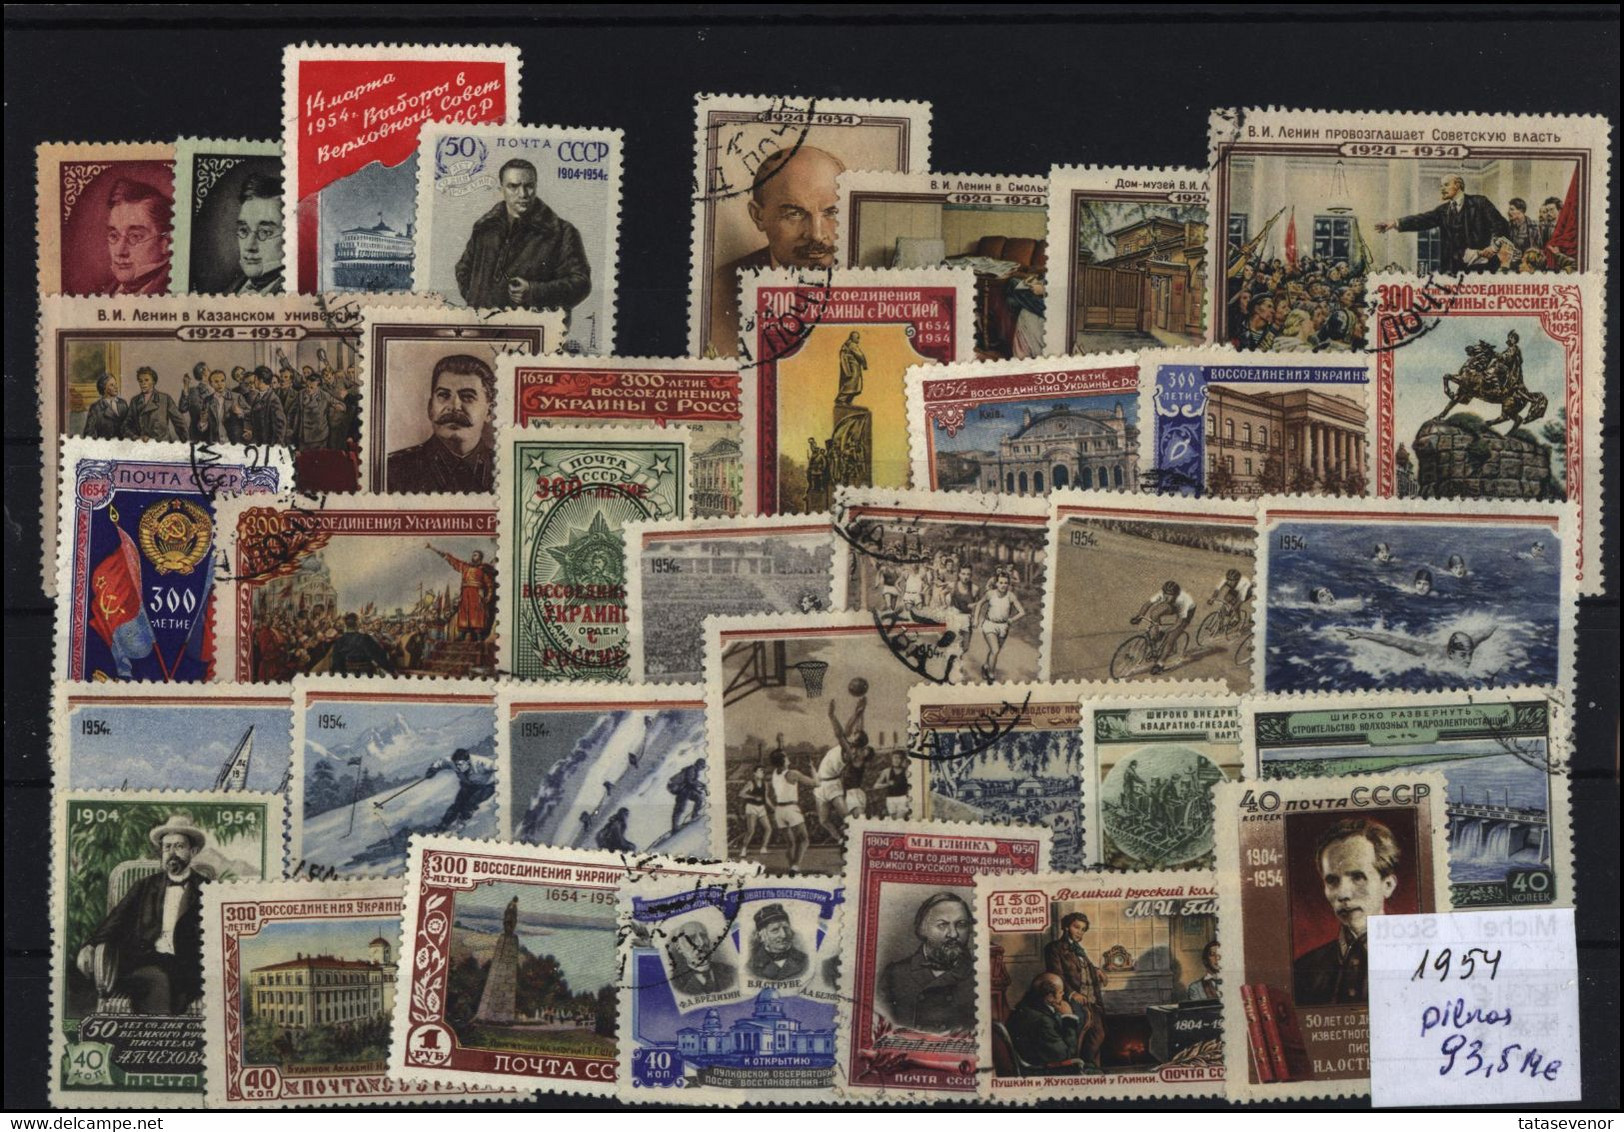 RUSSIA USSR Complete Year Set USED 1954 ROST - Full Years